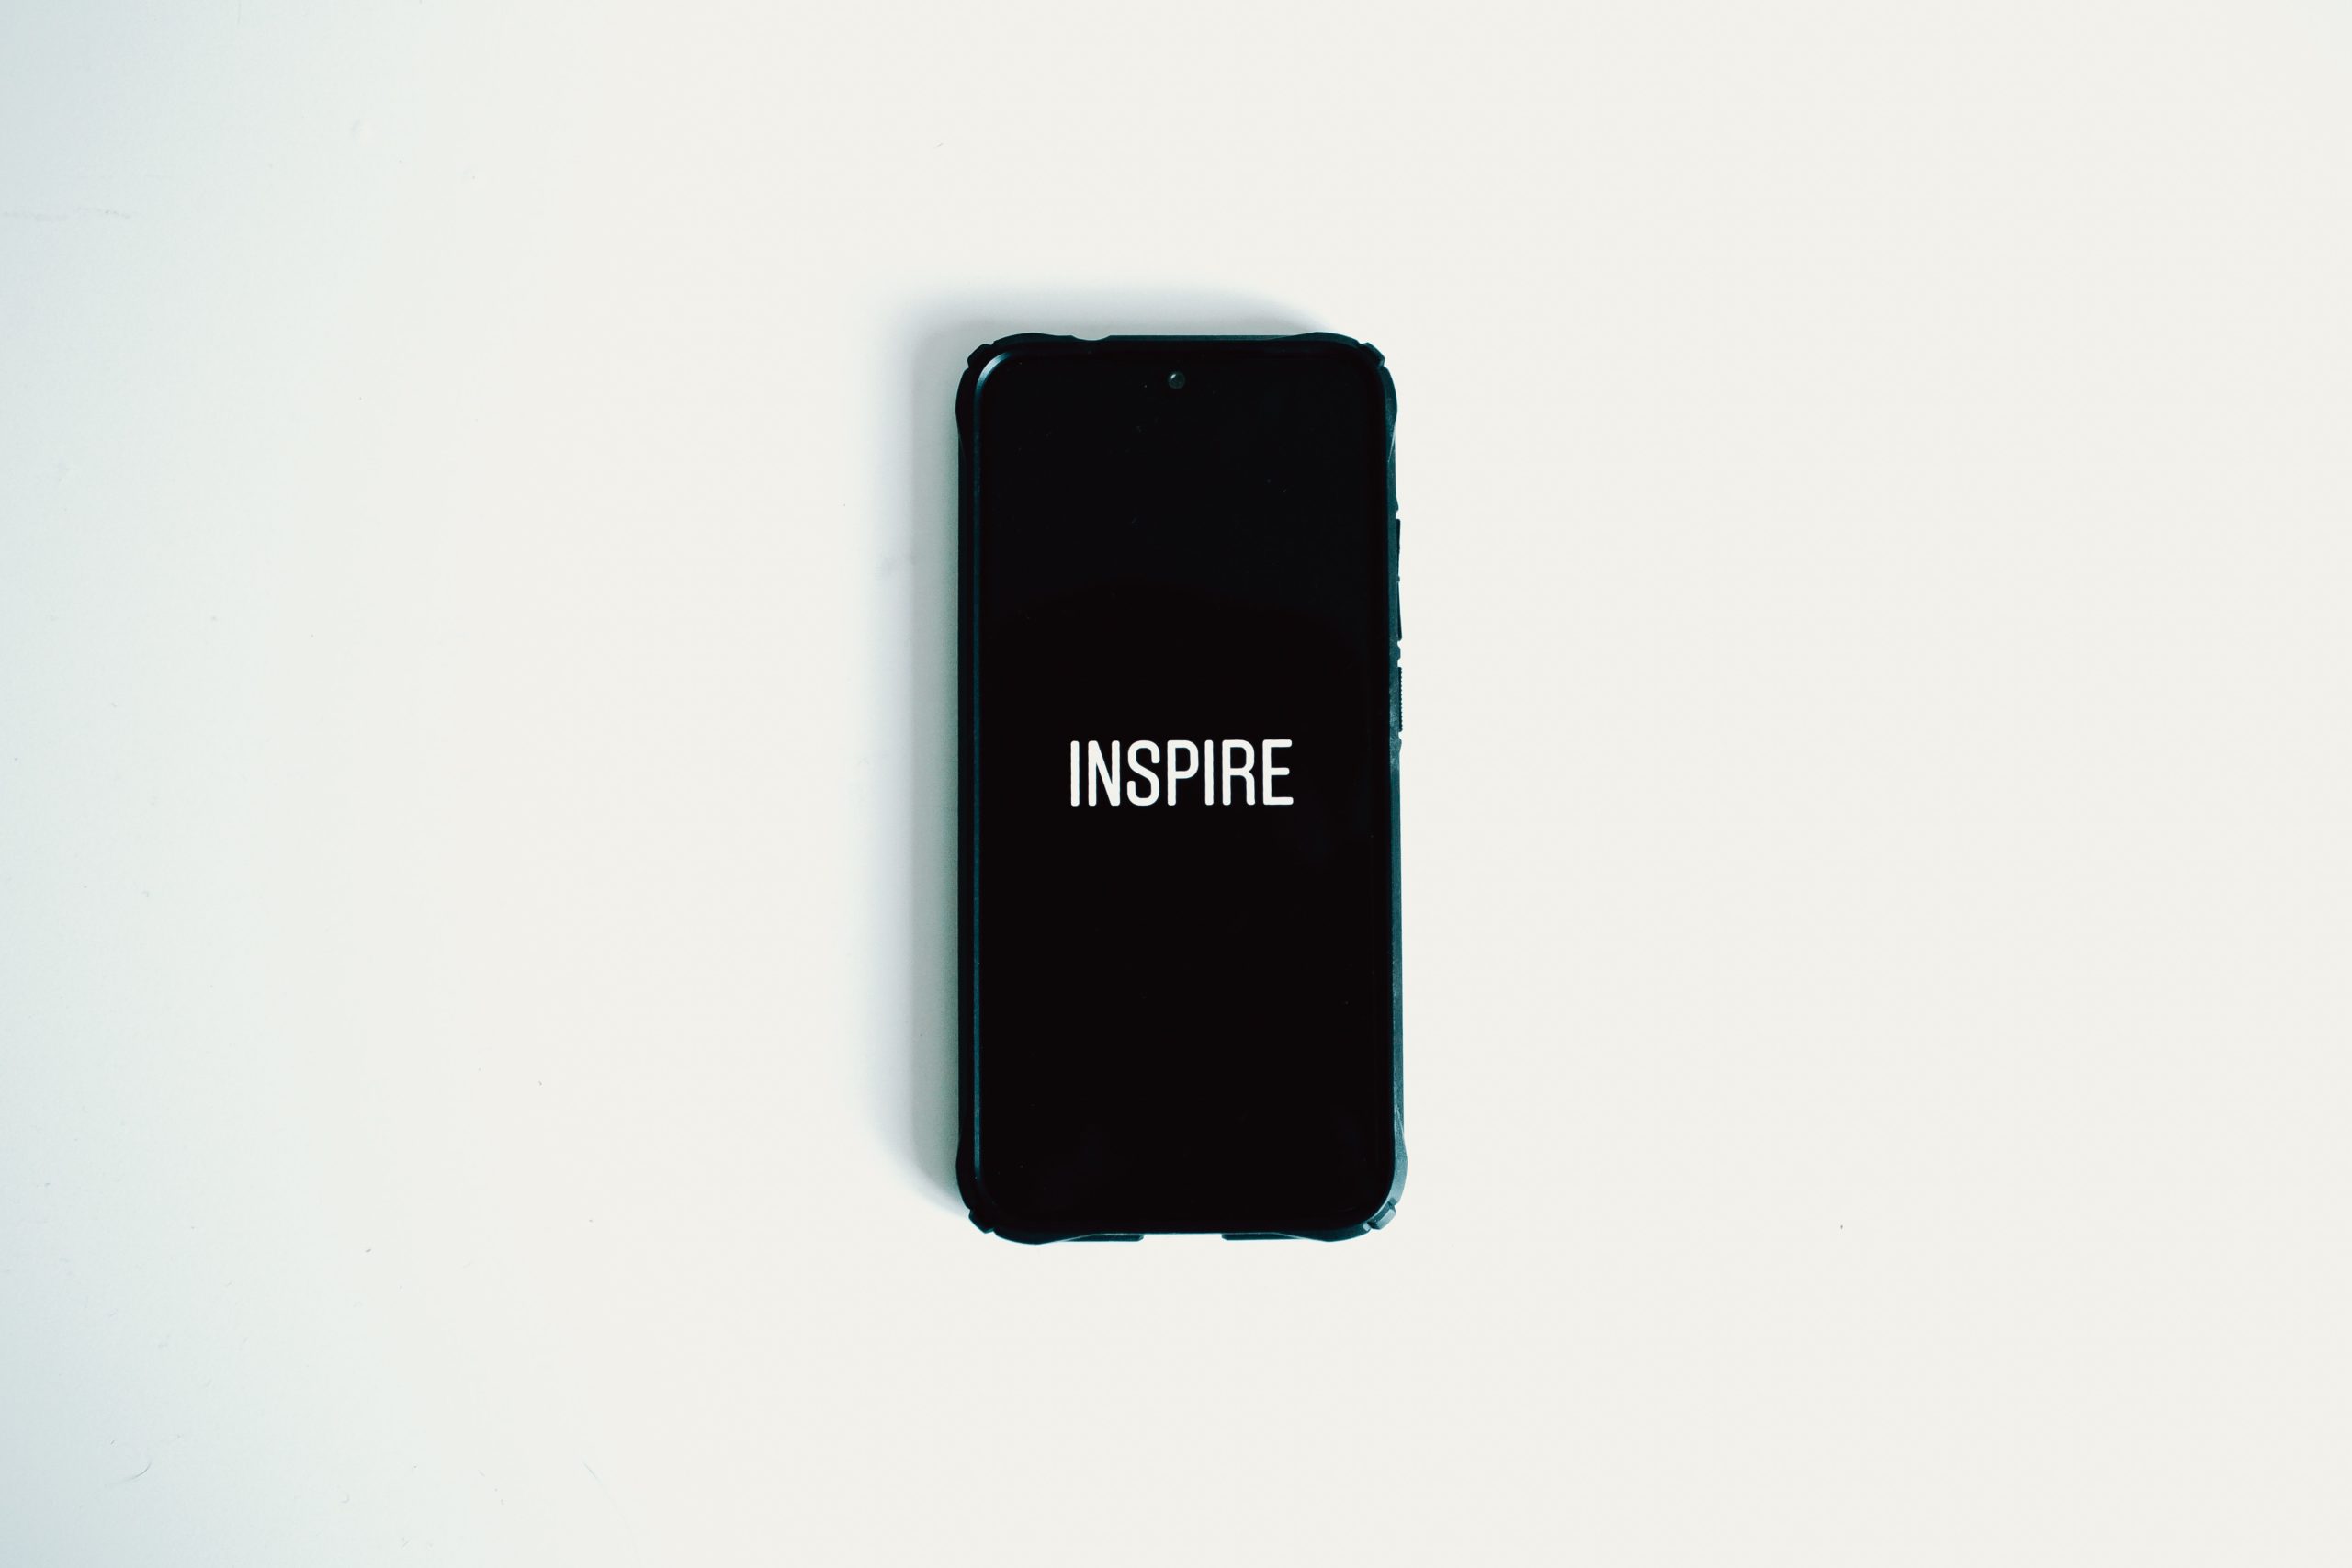 A smartphone that says, "INSPIRE," lies on a white surface.